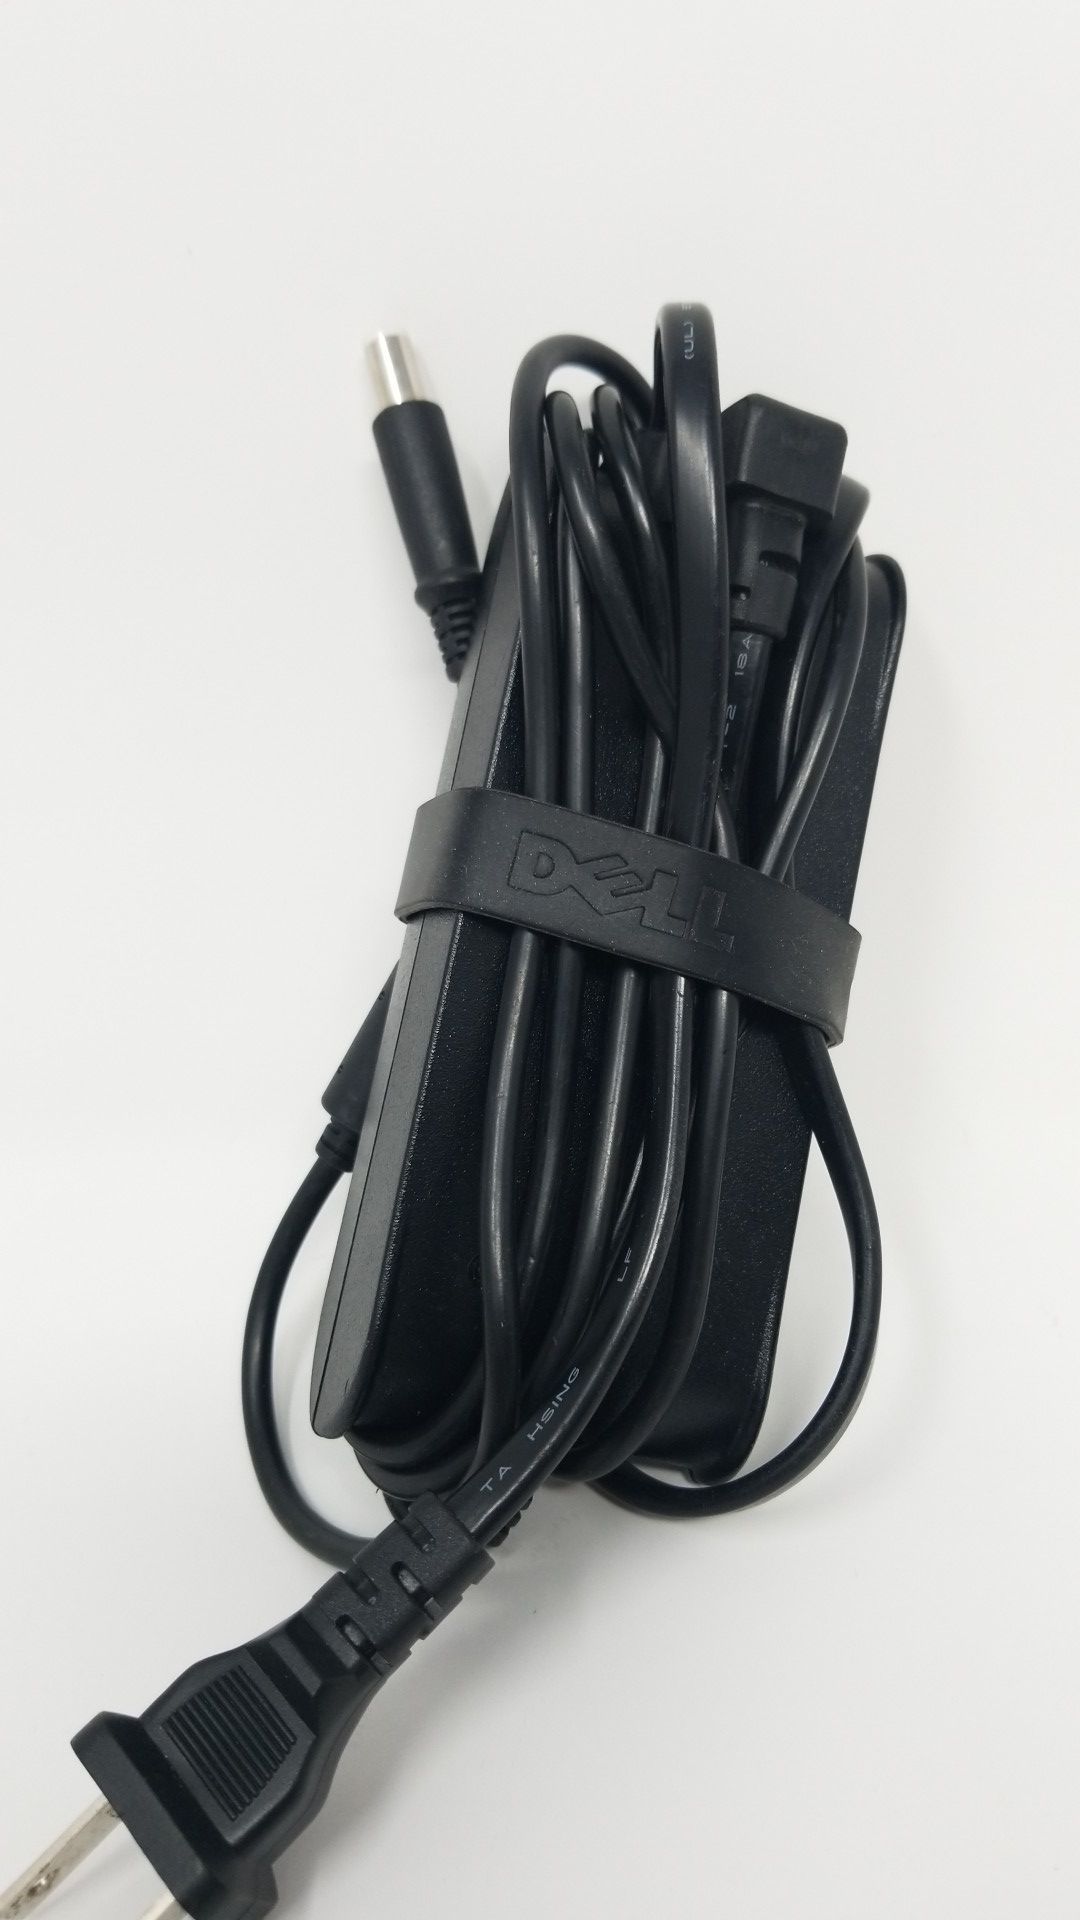 Dell laptop charger fits most Dell computers 65w